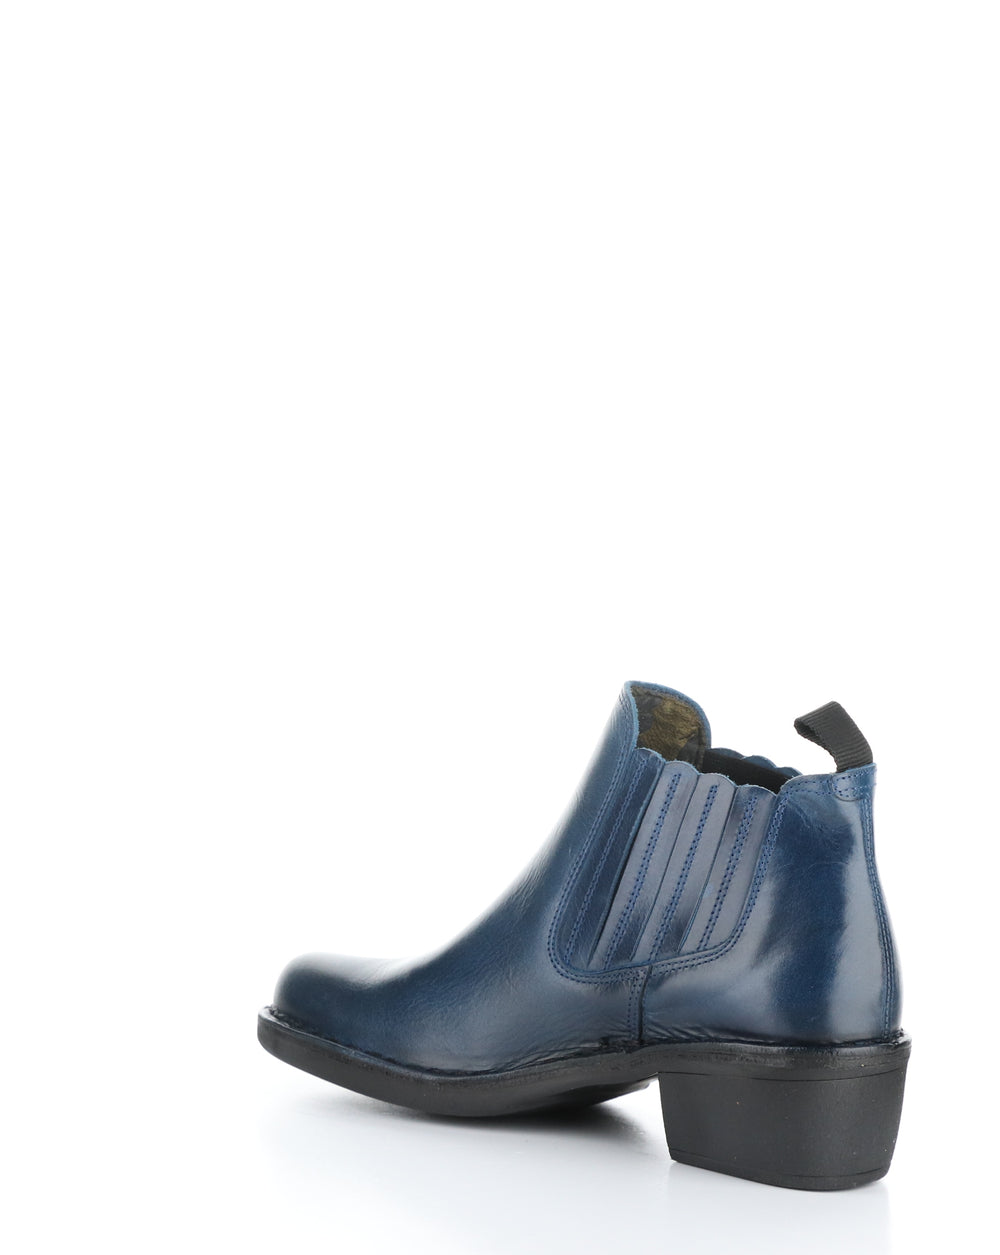 MOOF103FLY 005 ROYAL BLUE Round Toe Boots